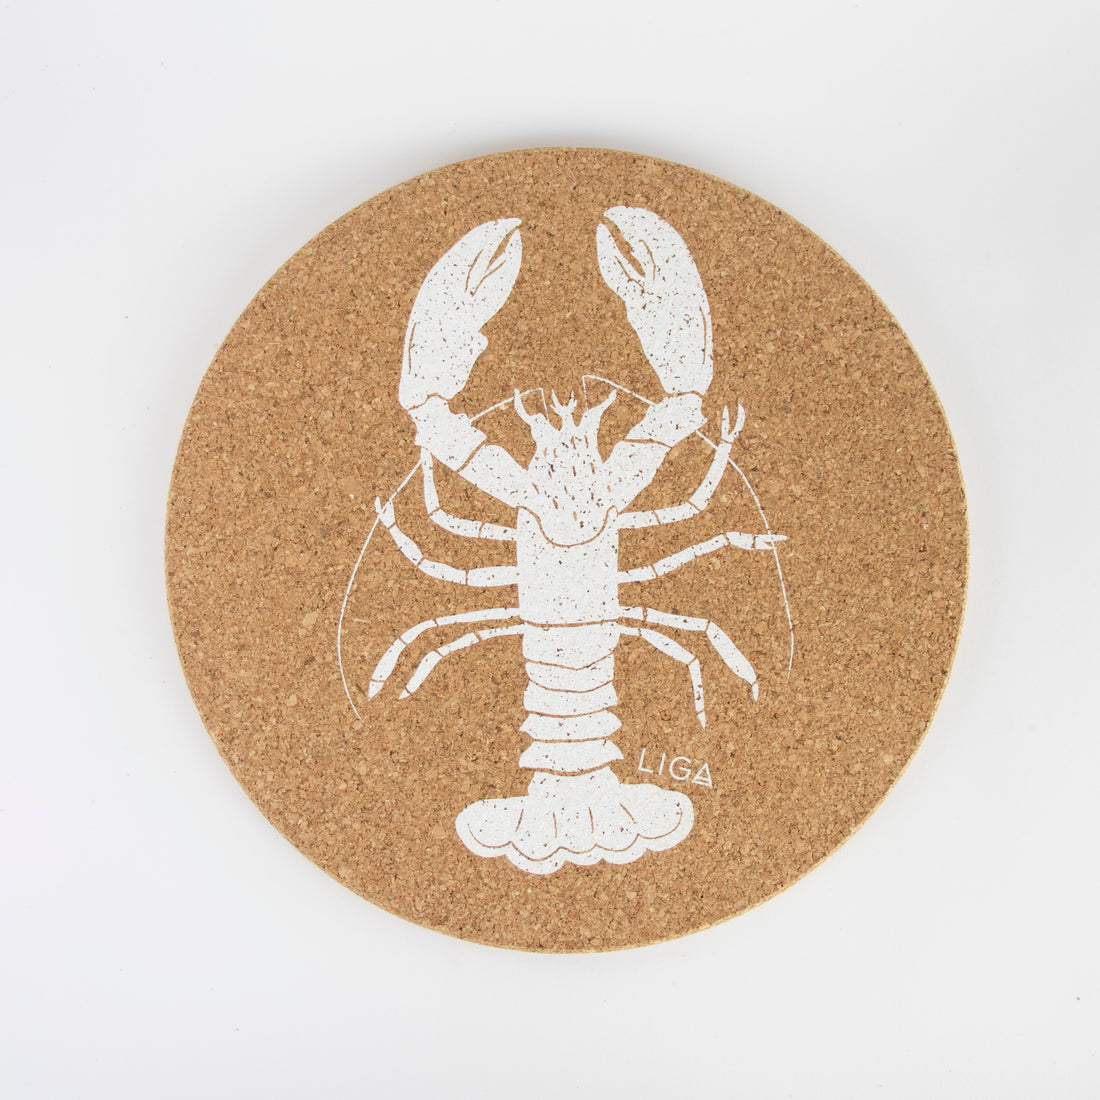 Eco friendly cork placemats + coasters. Lobster design